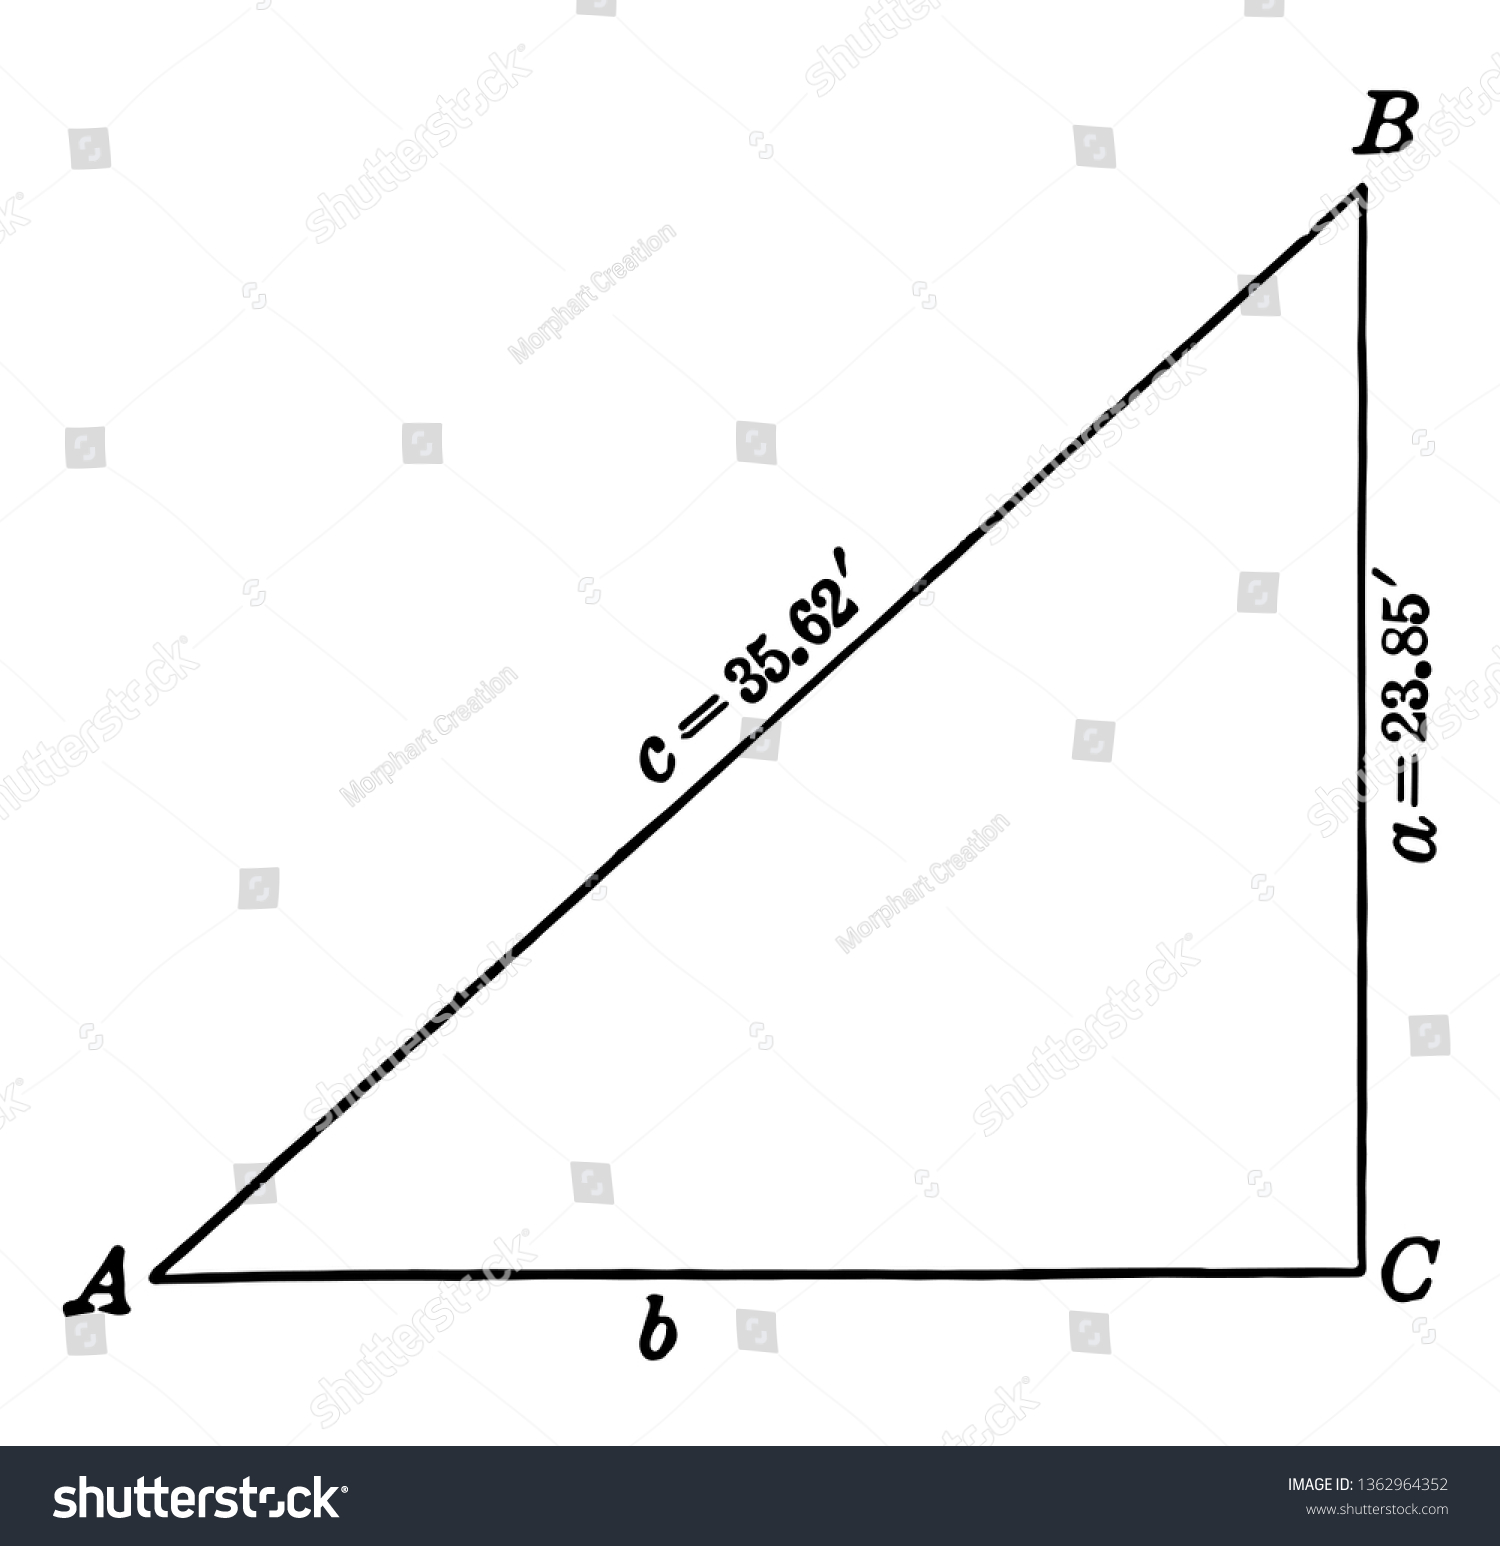 Image Shows Right Triangle Abc That Stock Vector Royalty Free 1362964352 Shutterstock 9625